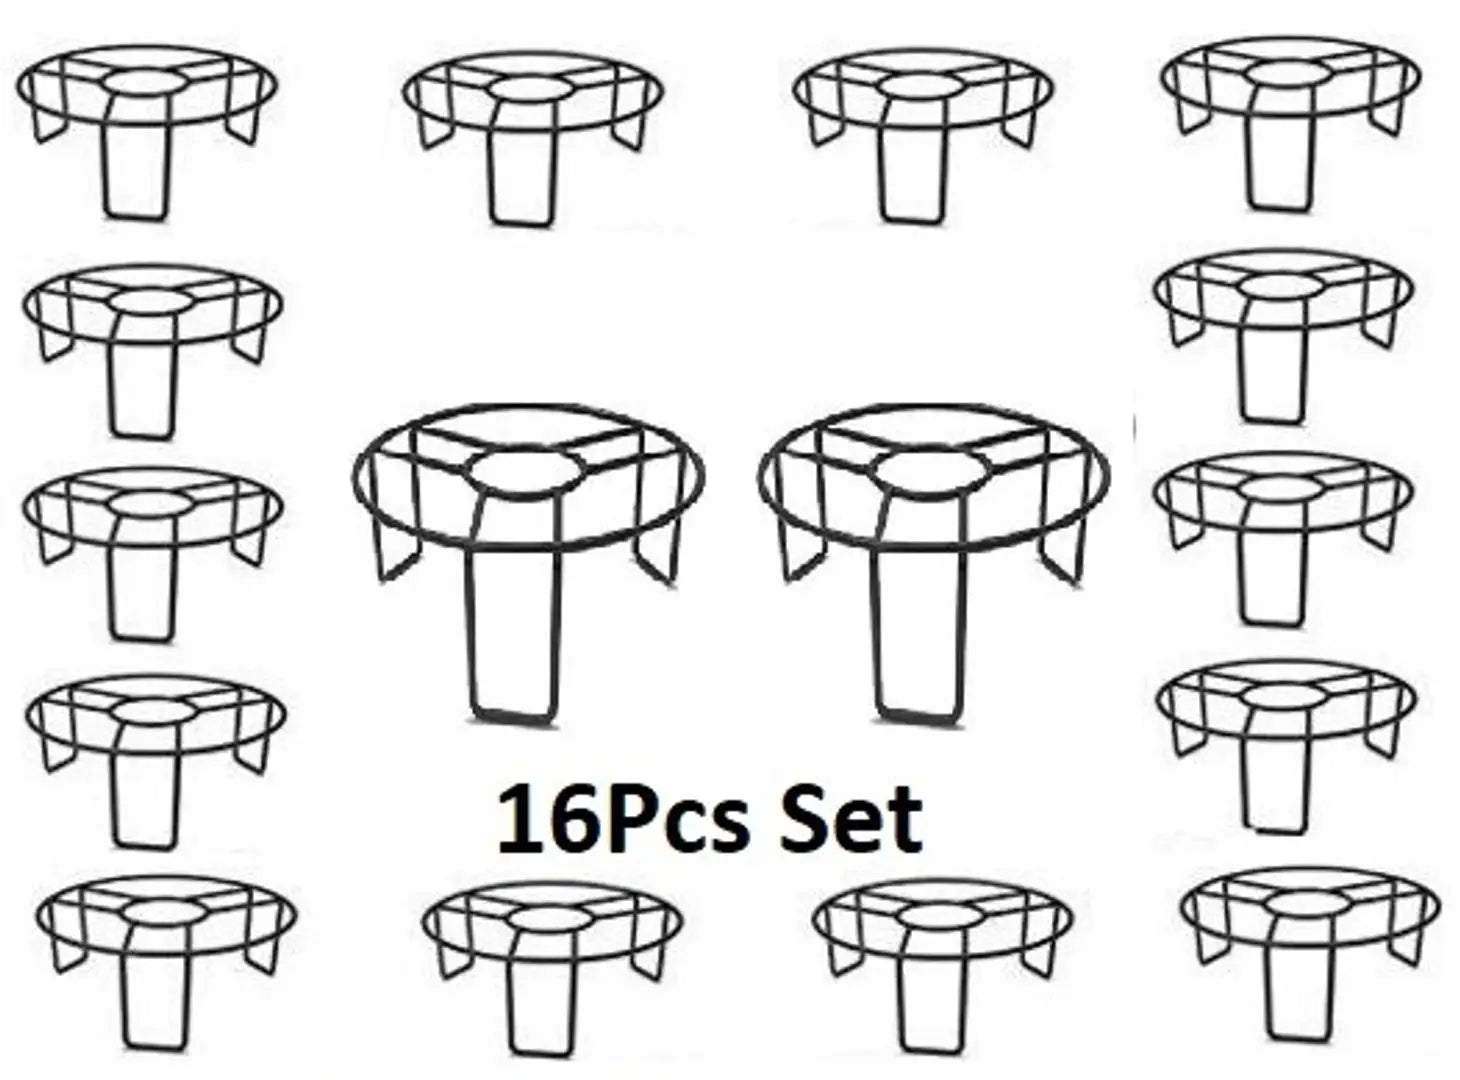 Alight Round gamla stand / planter stand / flower pot stand for indoor / outdoor gardening (pack of 16 pcs)